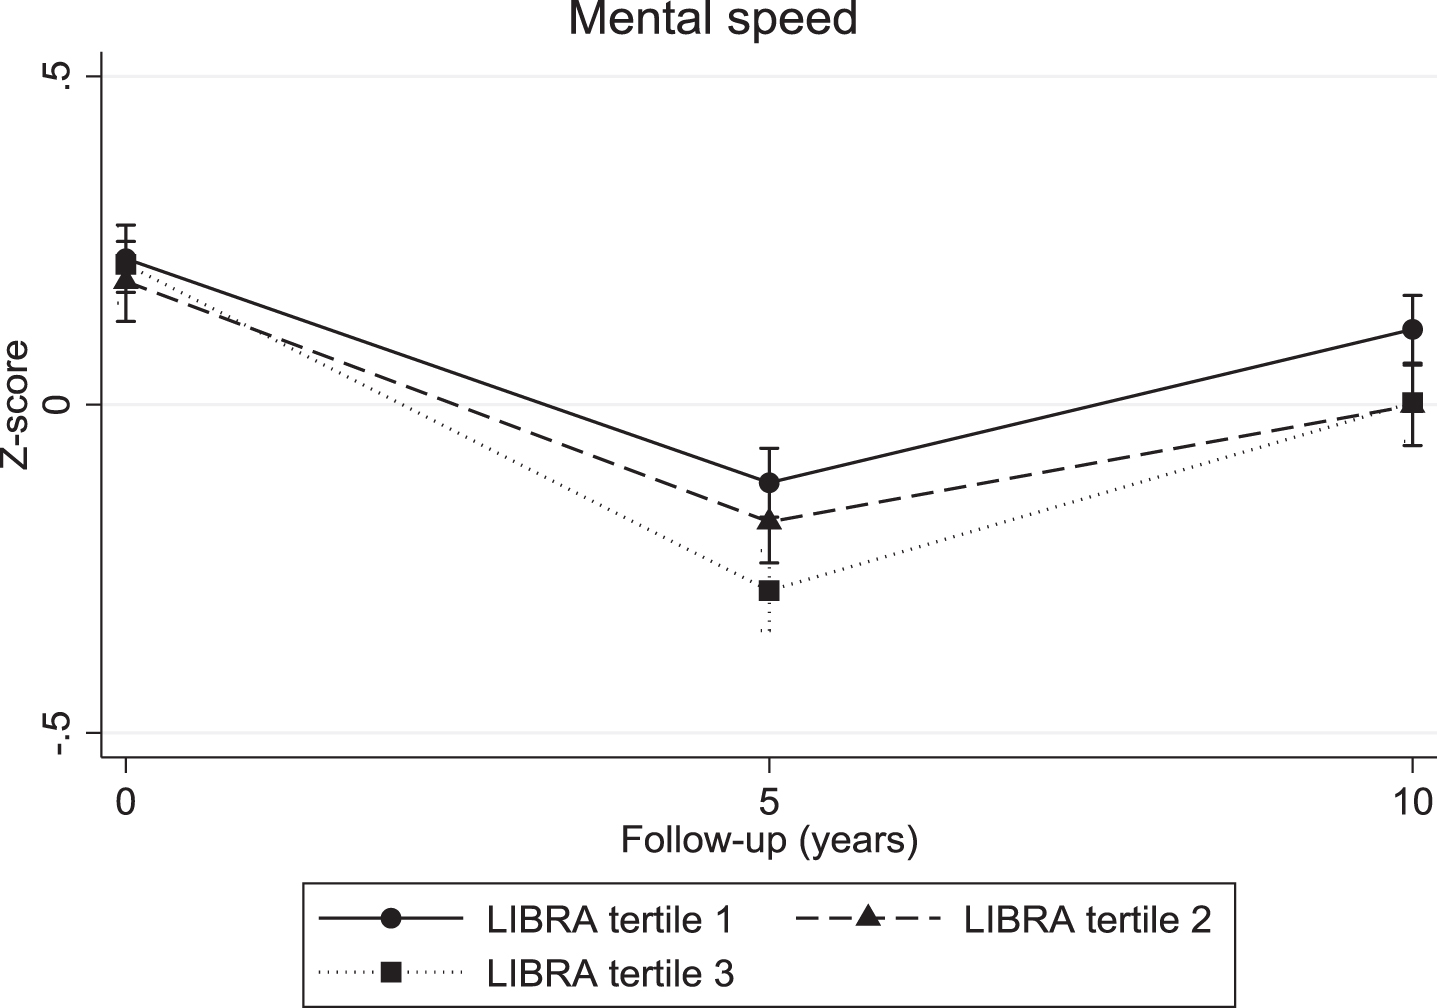 Mental speed trajectories for individuals in the three LIBRA risk groups.